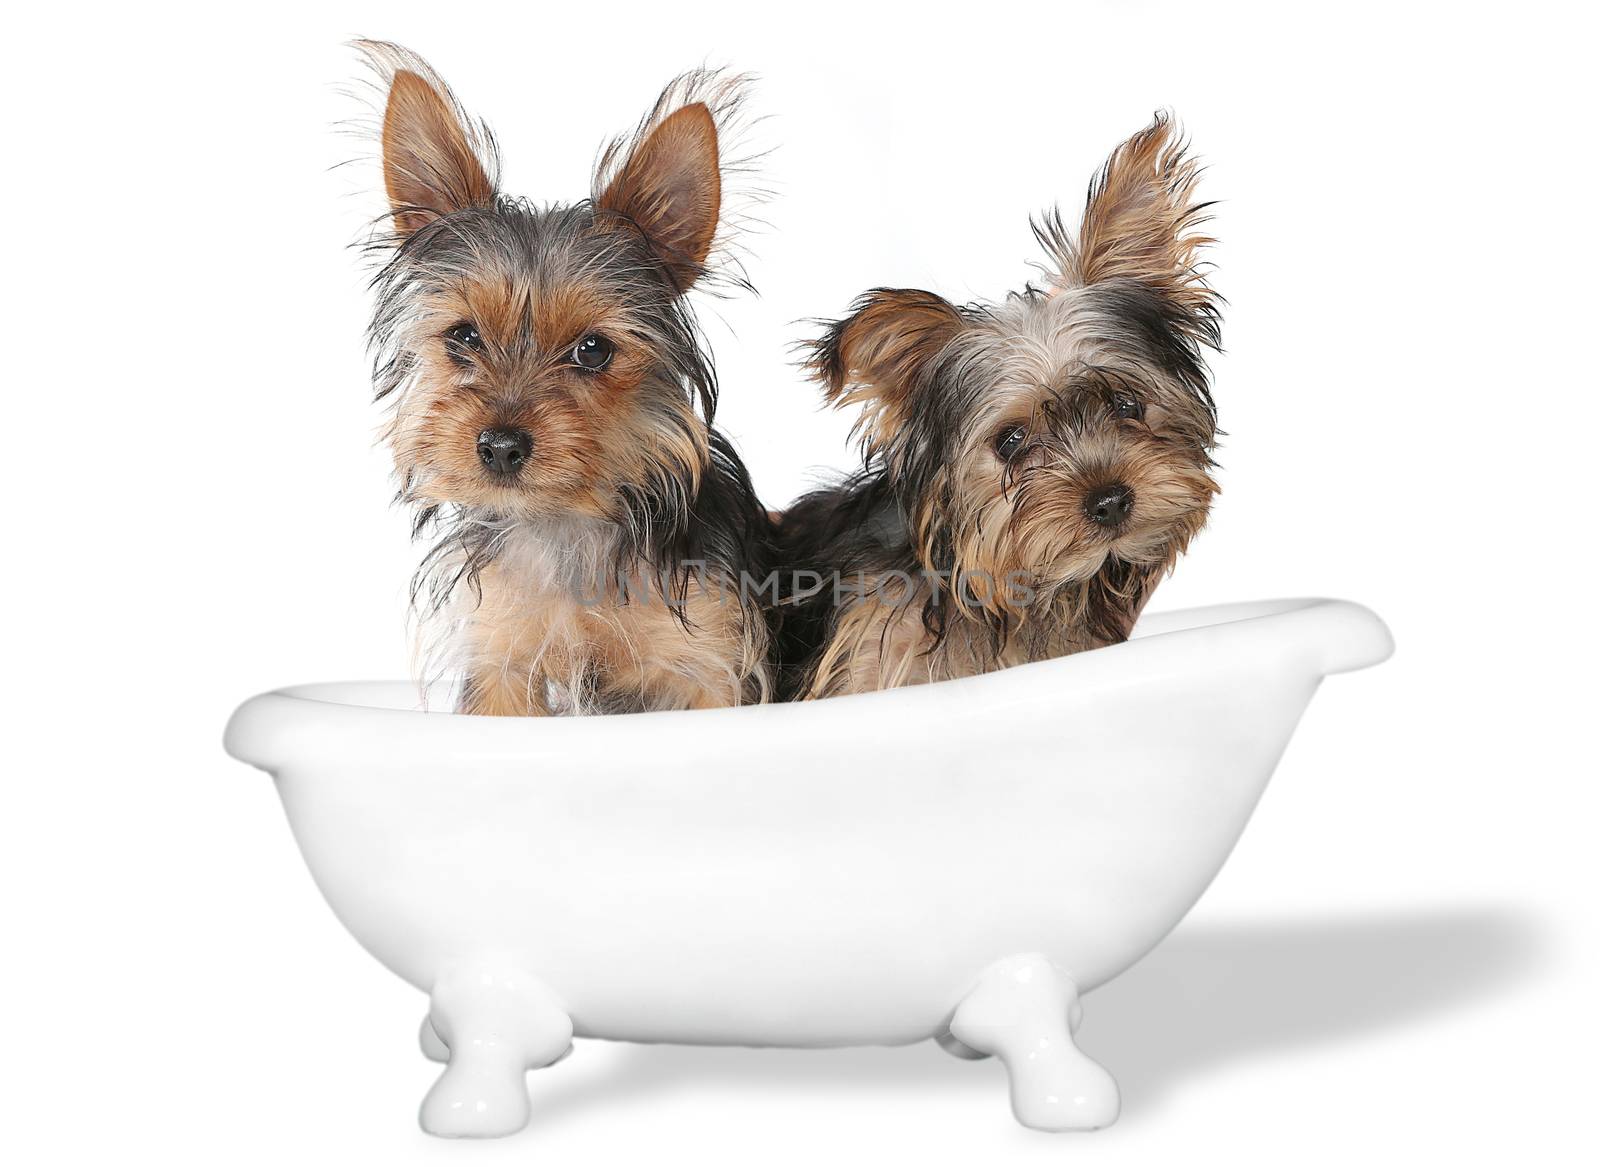 Tiny Teacup Yorkshire Terriers on White Bathing